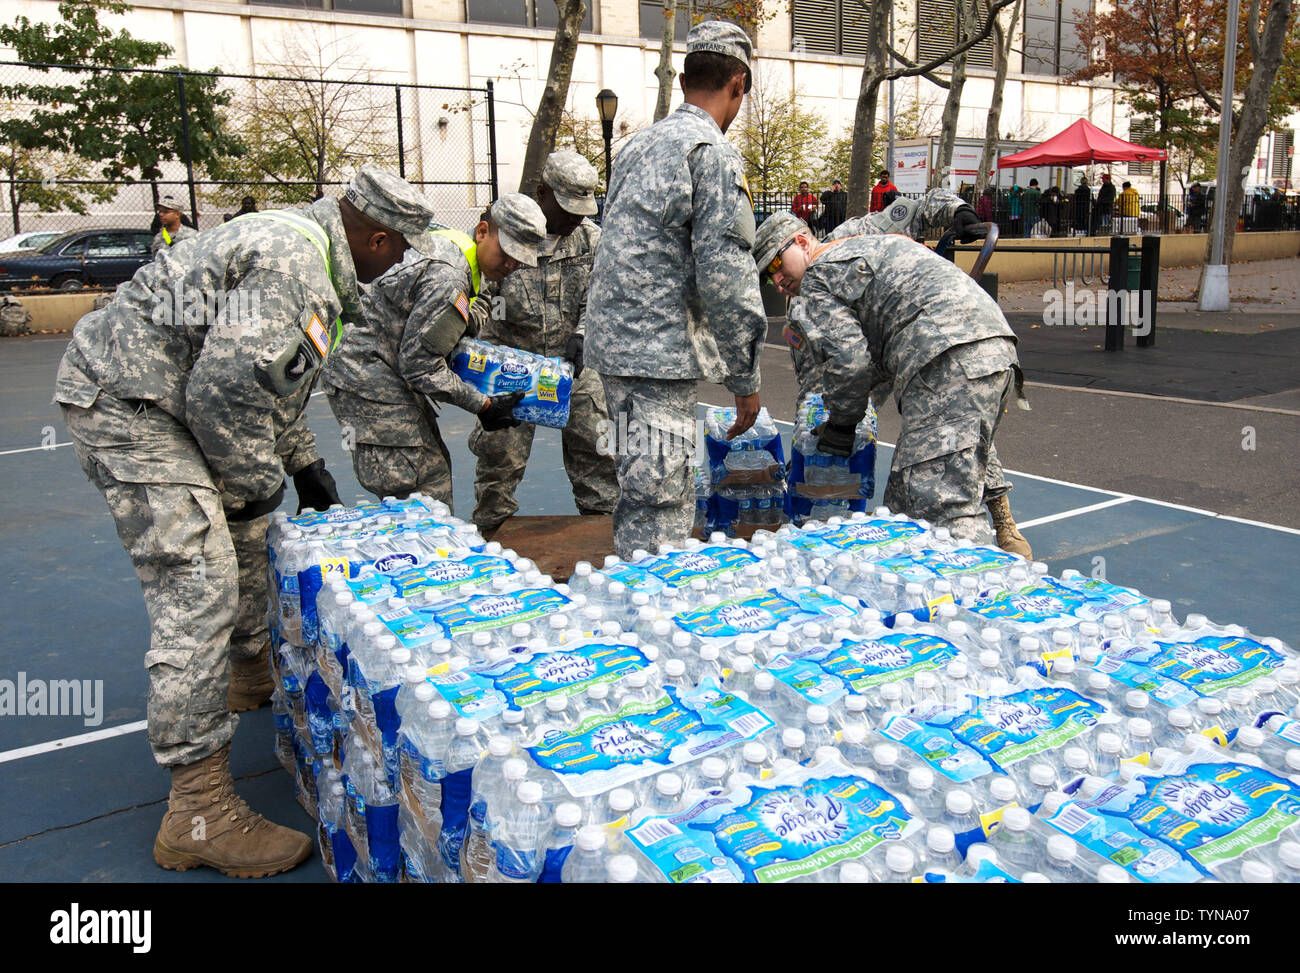 Members of the National Guard stack bottled water which will be distributed to residents who have been without power in the neighborhood of Chelsea due to Hurricane Sandy on November 2, 2012 in New York City. Hundreds of thousands throughout the eastern seaboard have been without power after the superstorm brought on record storm surges and intense winds.     UPI /Monika Graff Stock Photo